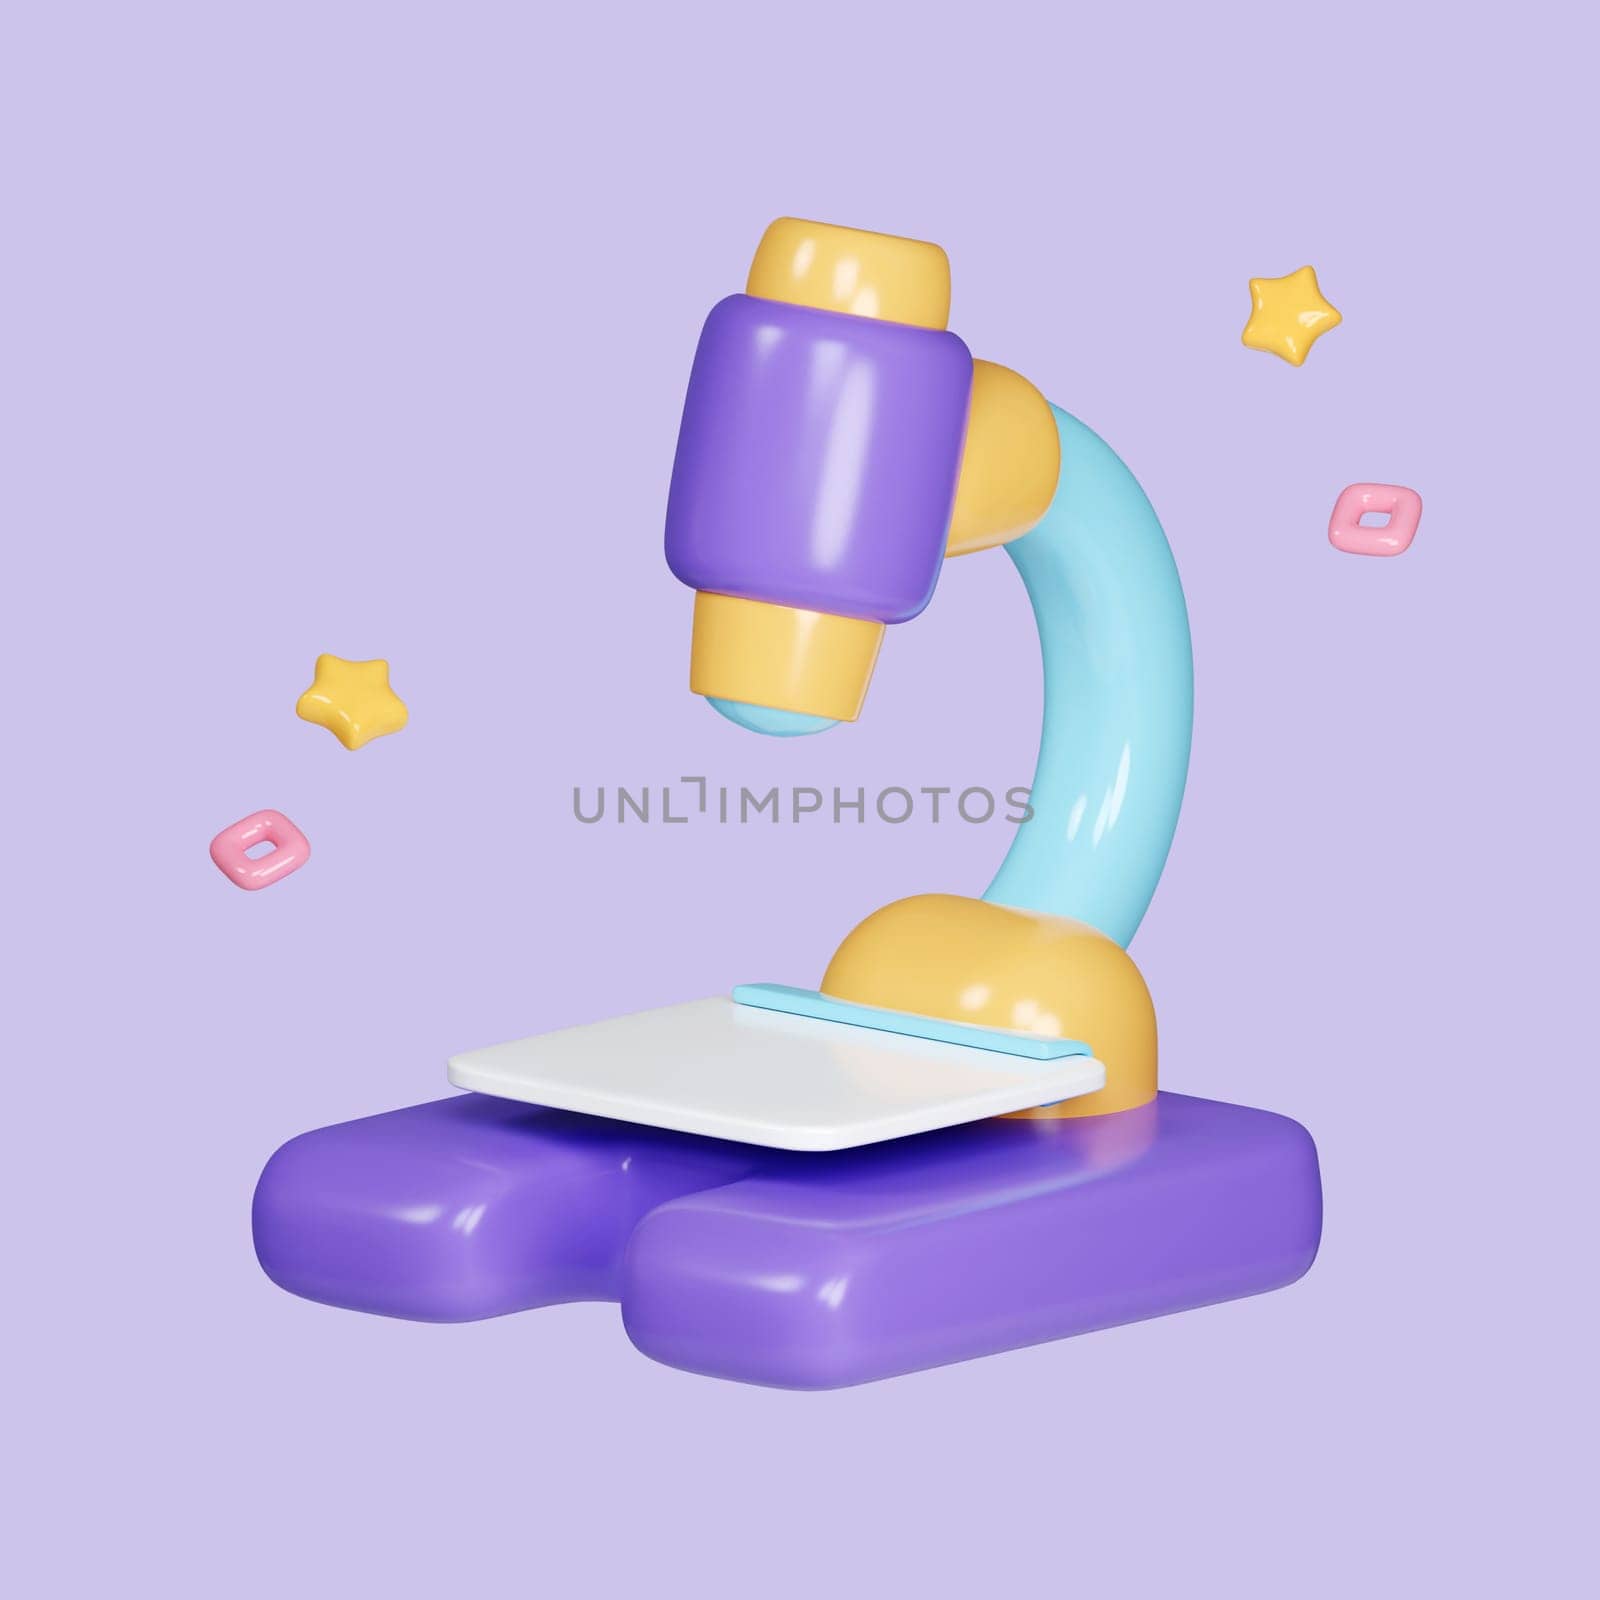 Microscope. Chemistry, pharmaceuticals, microbiology, science, exploration symbol cartoon style. icon isolated on pastel background. icon symbol clipping path. 3d render illustration.